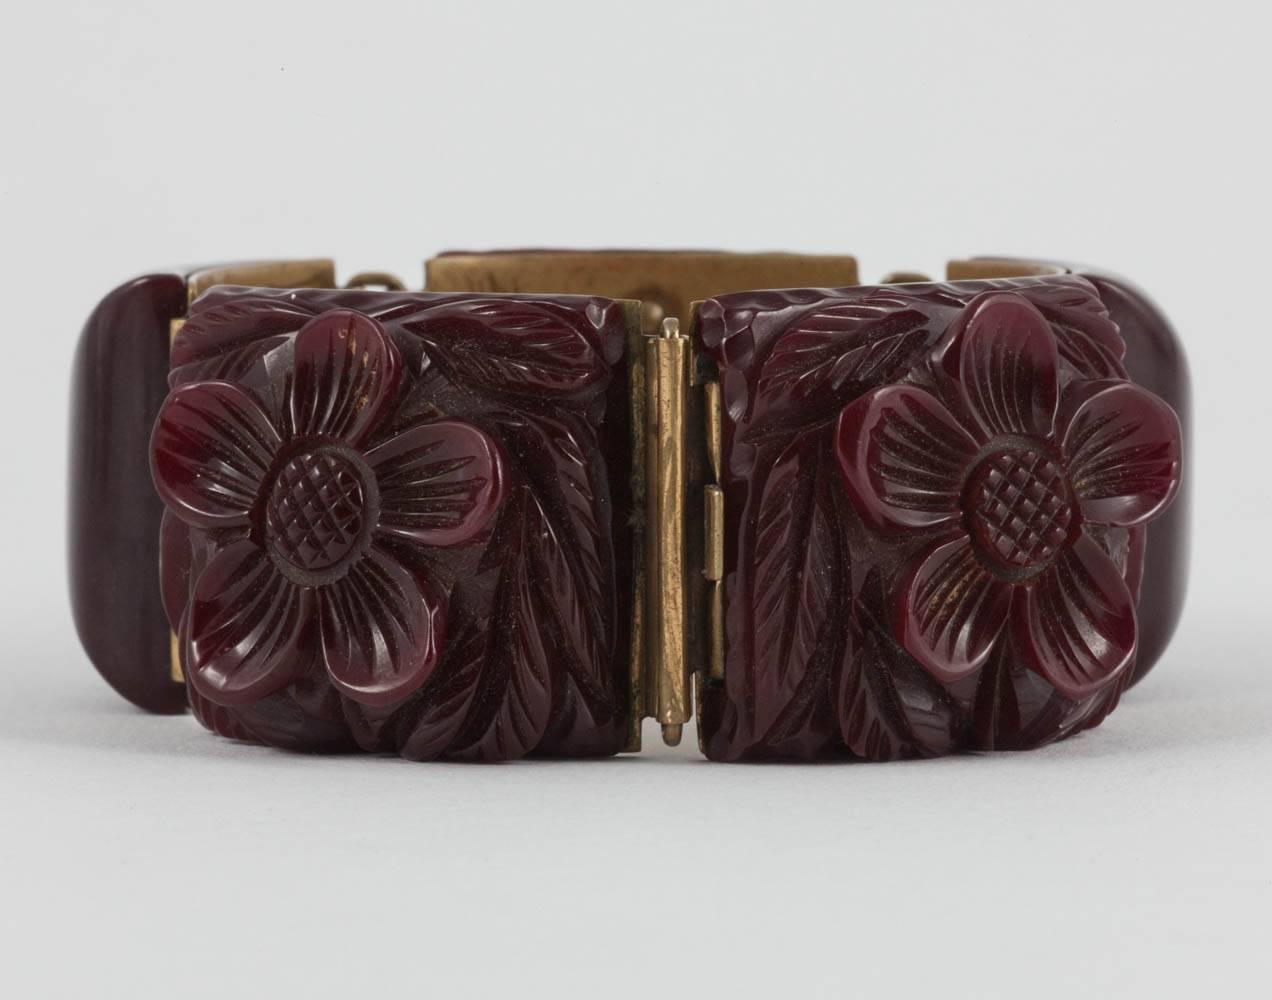 A very strong carved maroon Bakelite bracelet, with a stylised flower design, on every other panel, a gently polished and curved piece of Bakelite on the other panels. Set in brass, this is a beautiful and very wearable bracelet.